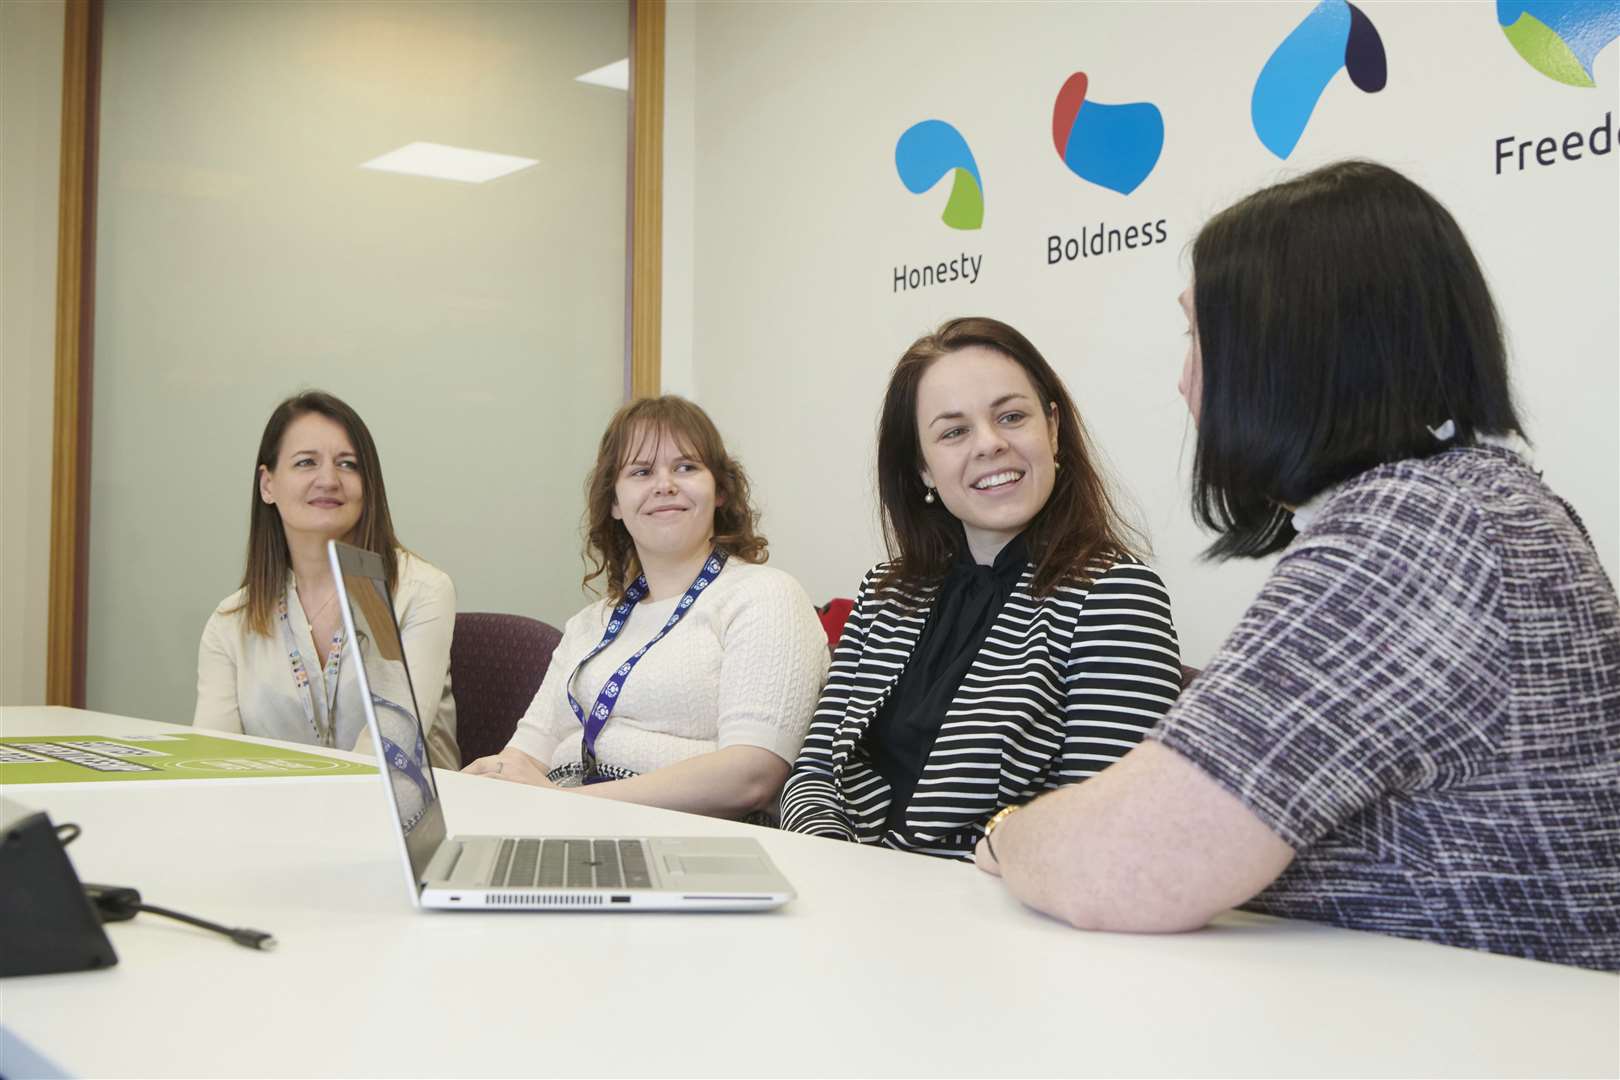 Finance minister Kate Forbes met graduate apprentices at Capgemini during a visit this week.